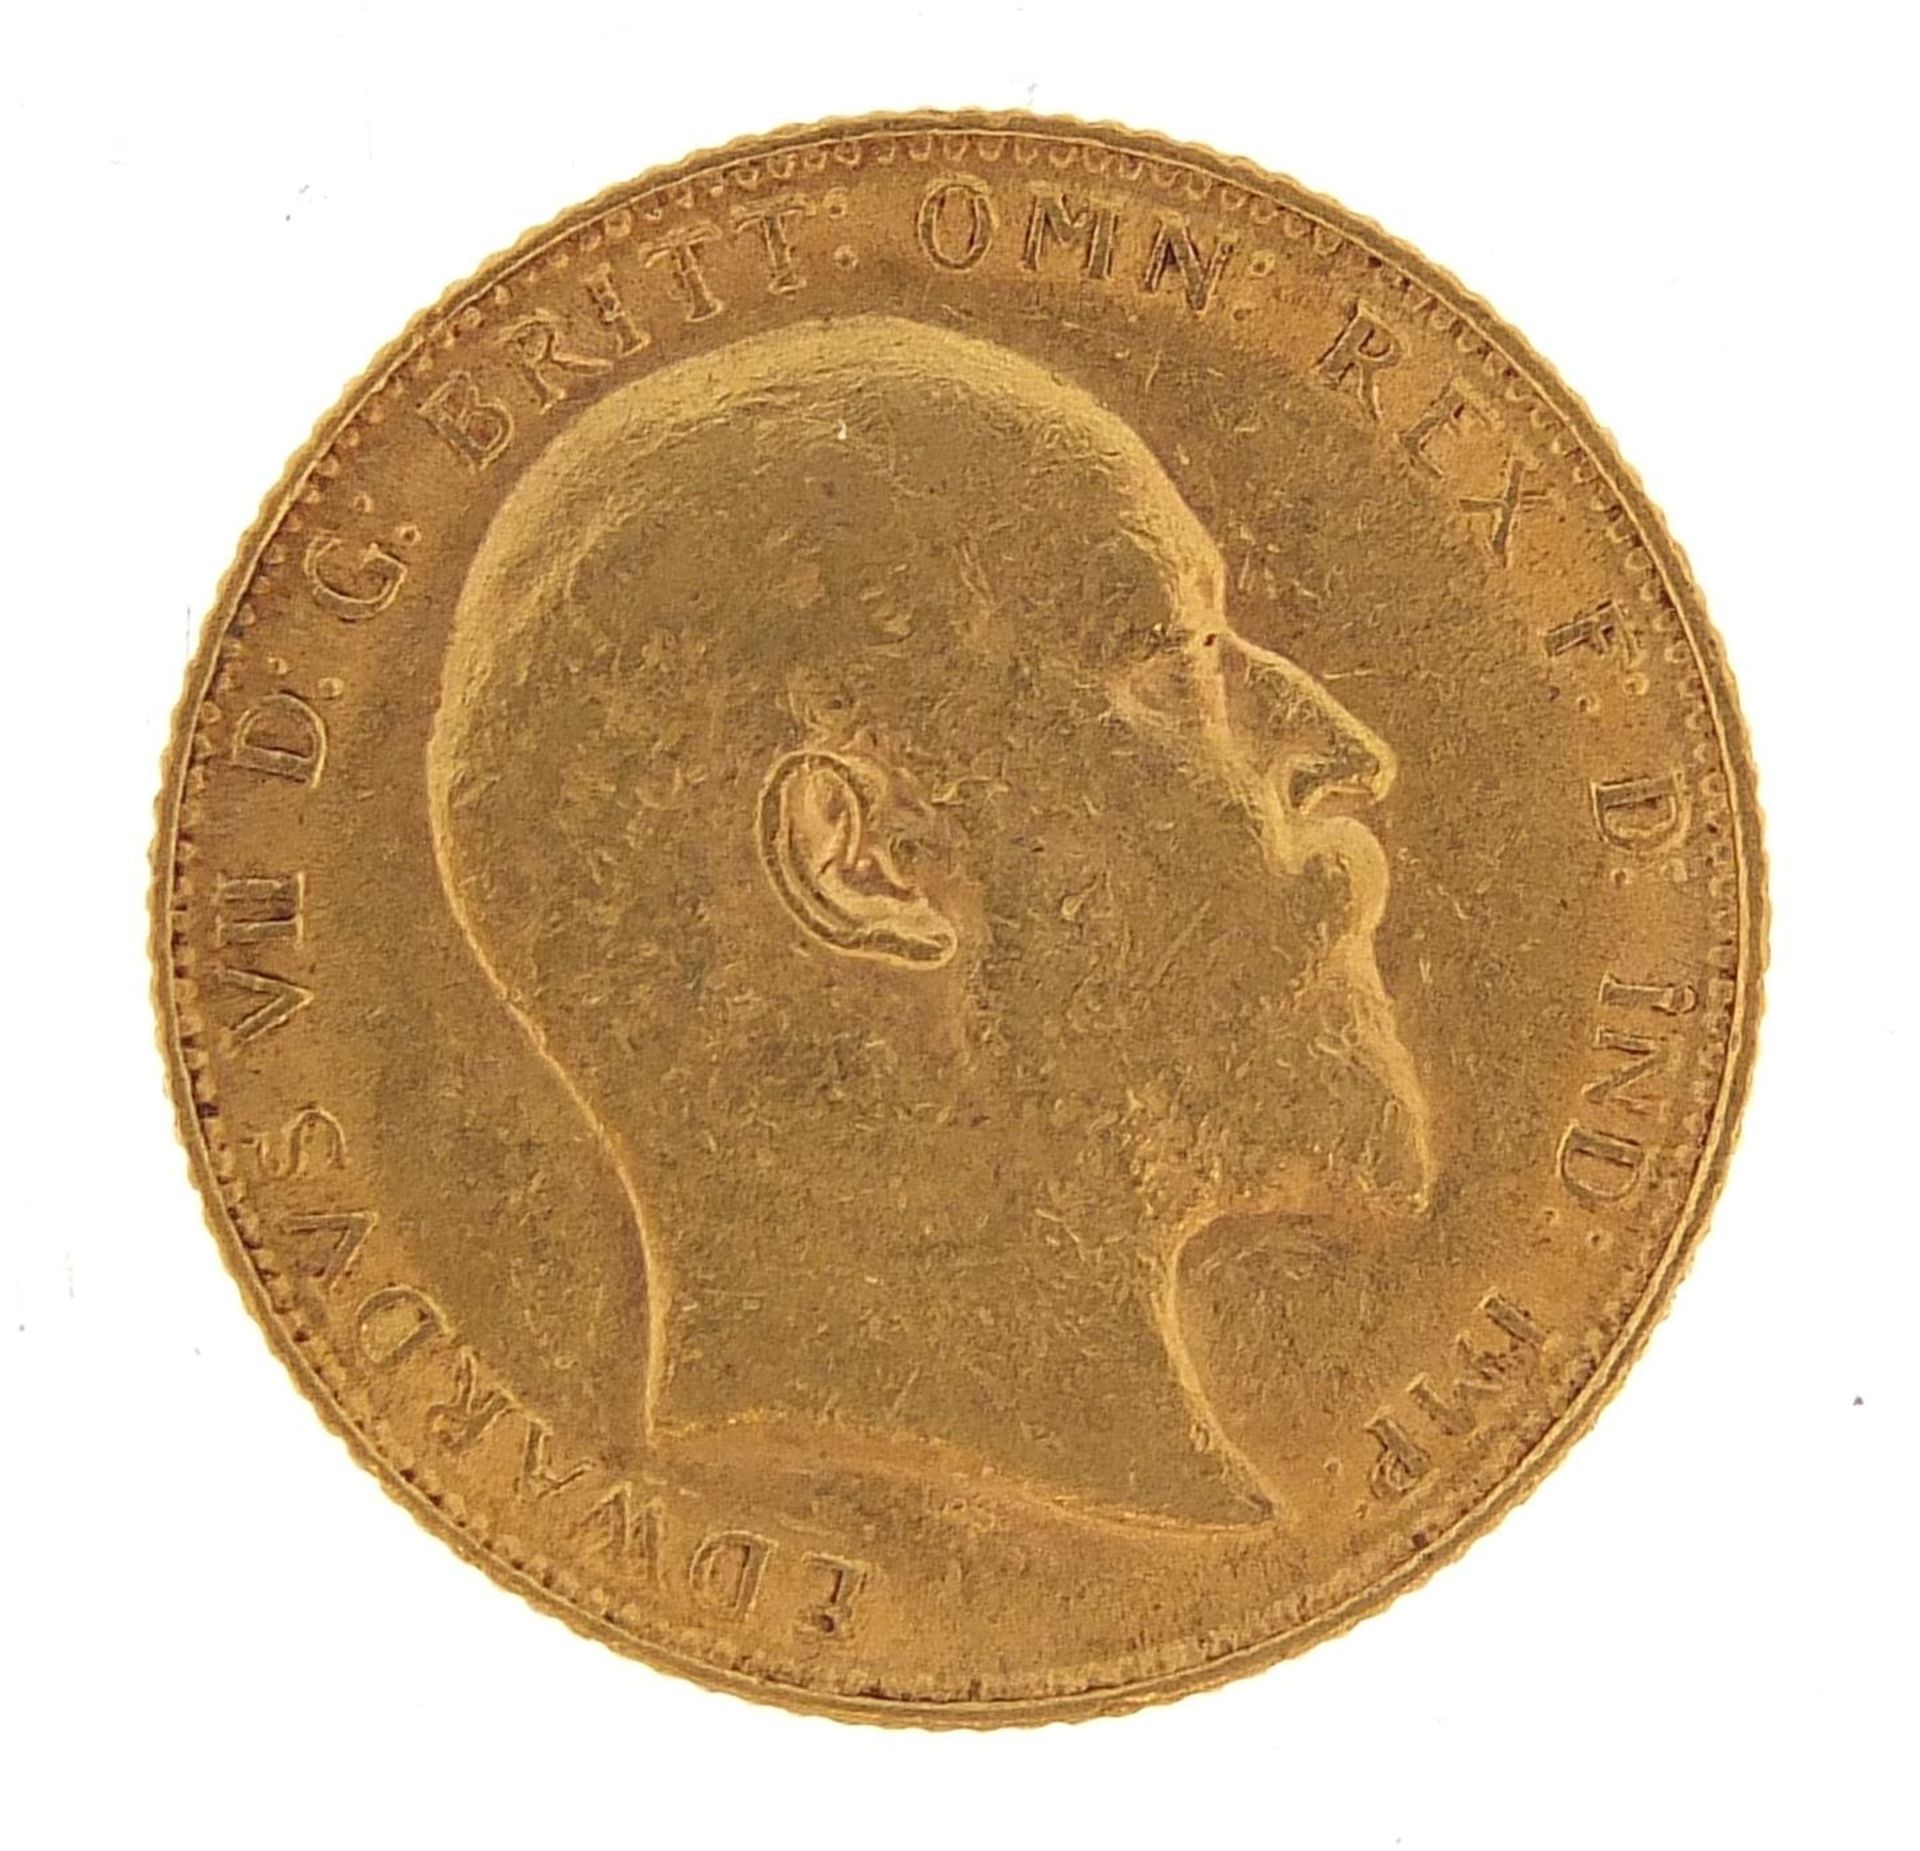 Edward VII 1907 gold sovereign - this lot is sold without buyer's premium - Image 2 of 3